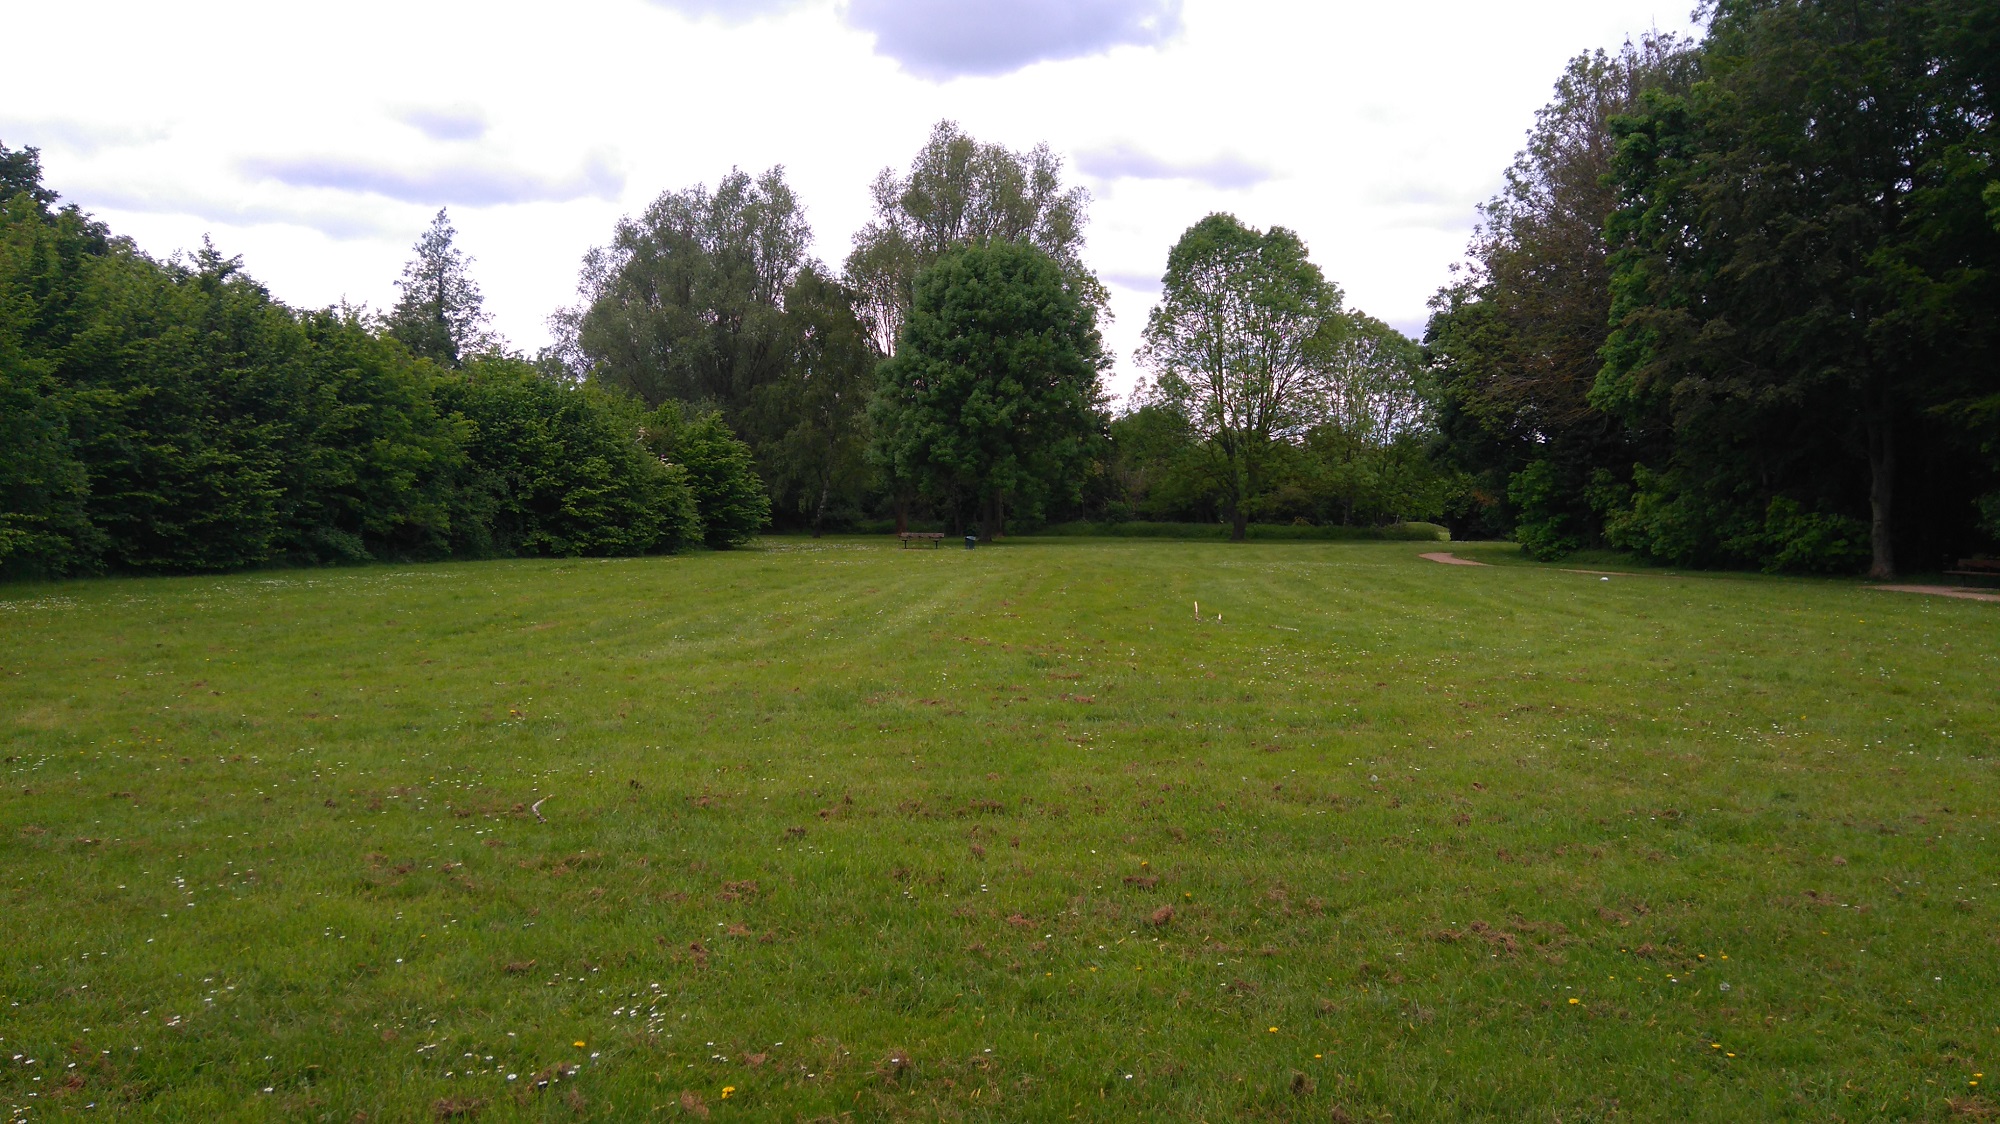 A park on a dry cloudy summer day. A long expanse of grass with trees to the right, left and in the background. A path is visible to the right. Thorpe, Surrey.